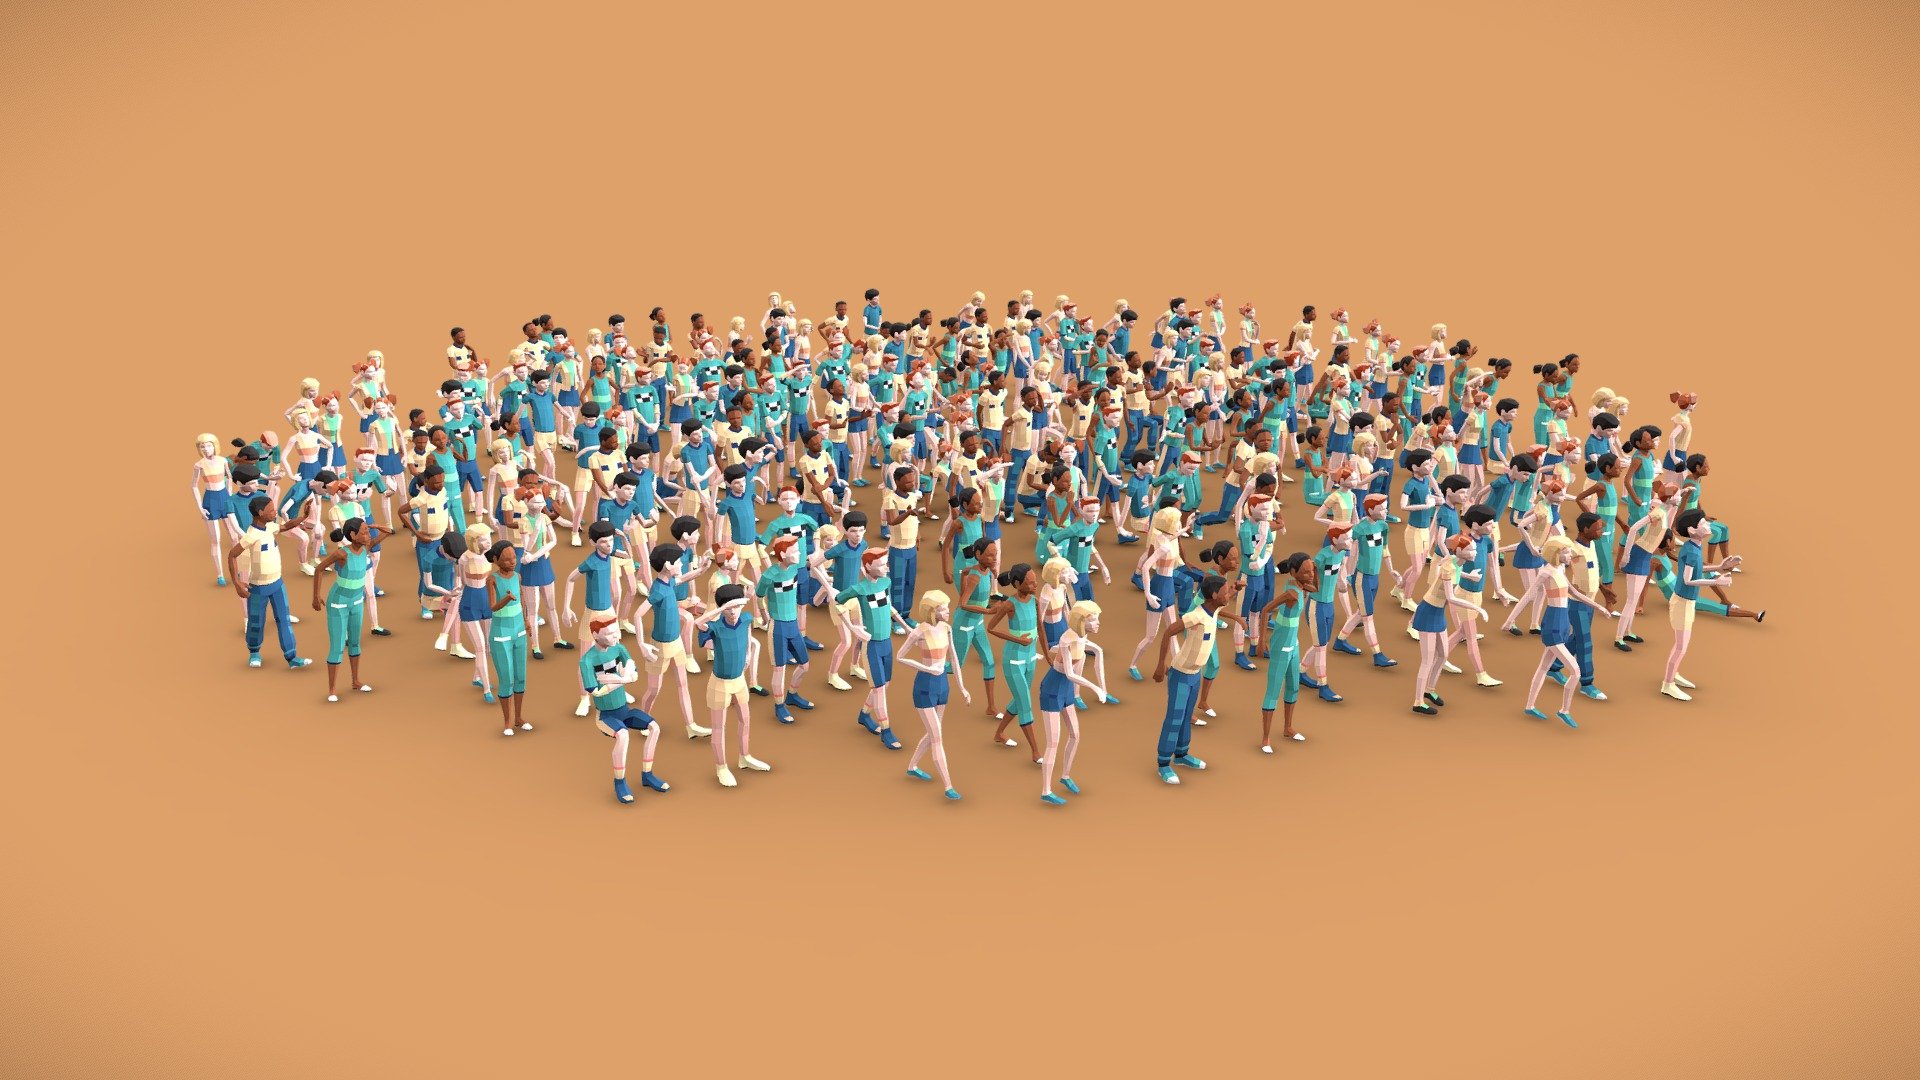 Static figures crafted from 6 unique pre-teen characters—3 girls and 3 boys—with 40 poses, this pack is perfect for depicting youthful and energetic scenes. Though they can all share a single texture, 21 additional texture variants are included, allowing for quick changes in color styles. Each character averages 800 polygons (or 1,600 triangles).

Ideal for ArchViz and graphic design, especially those focusing on children's spaces or activities!

Files are conveniently organized in two ways:




6 scene files, each containing 40 poses.

240 individual files, one for each pose, with meaningful filenames to identify characters and poses.

Available in MAX, FBX, and OBJ formats.

This pack if subset of: 4,000 Posed People Ultimate for ArchViz

See rigged alternative for animation and games: Low Poly Young Boys and Girls Rigged Pack - 240 Posed Kids - Girls and Boys Low-Poly Style - Buy Royalty Free 3D model by Denys Almaral (@denysalmaral) 3d model